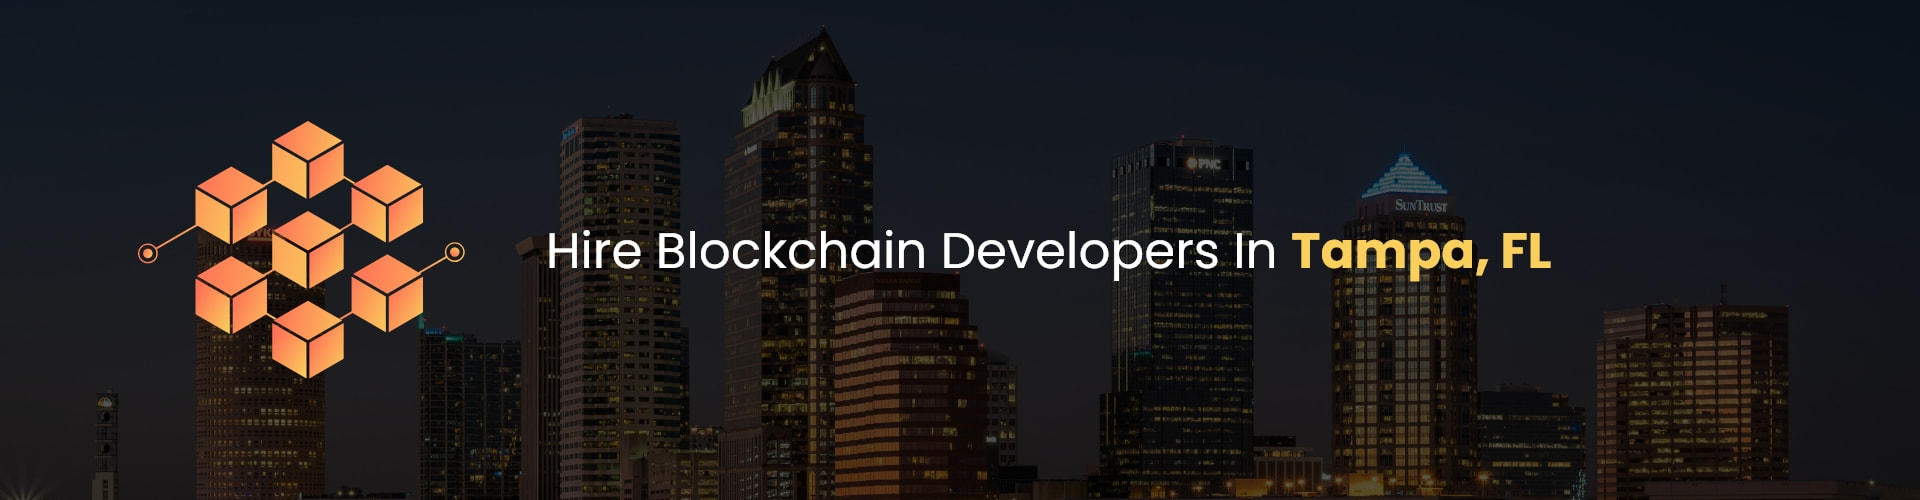 hire blockchain developers in tampa